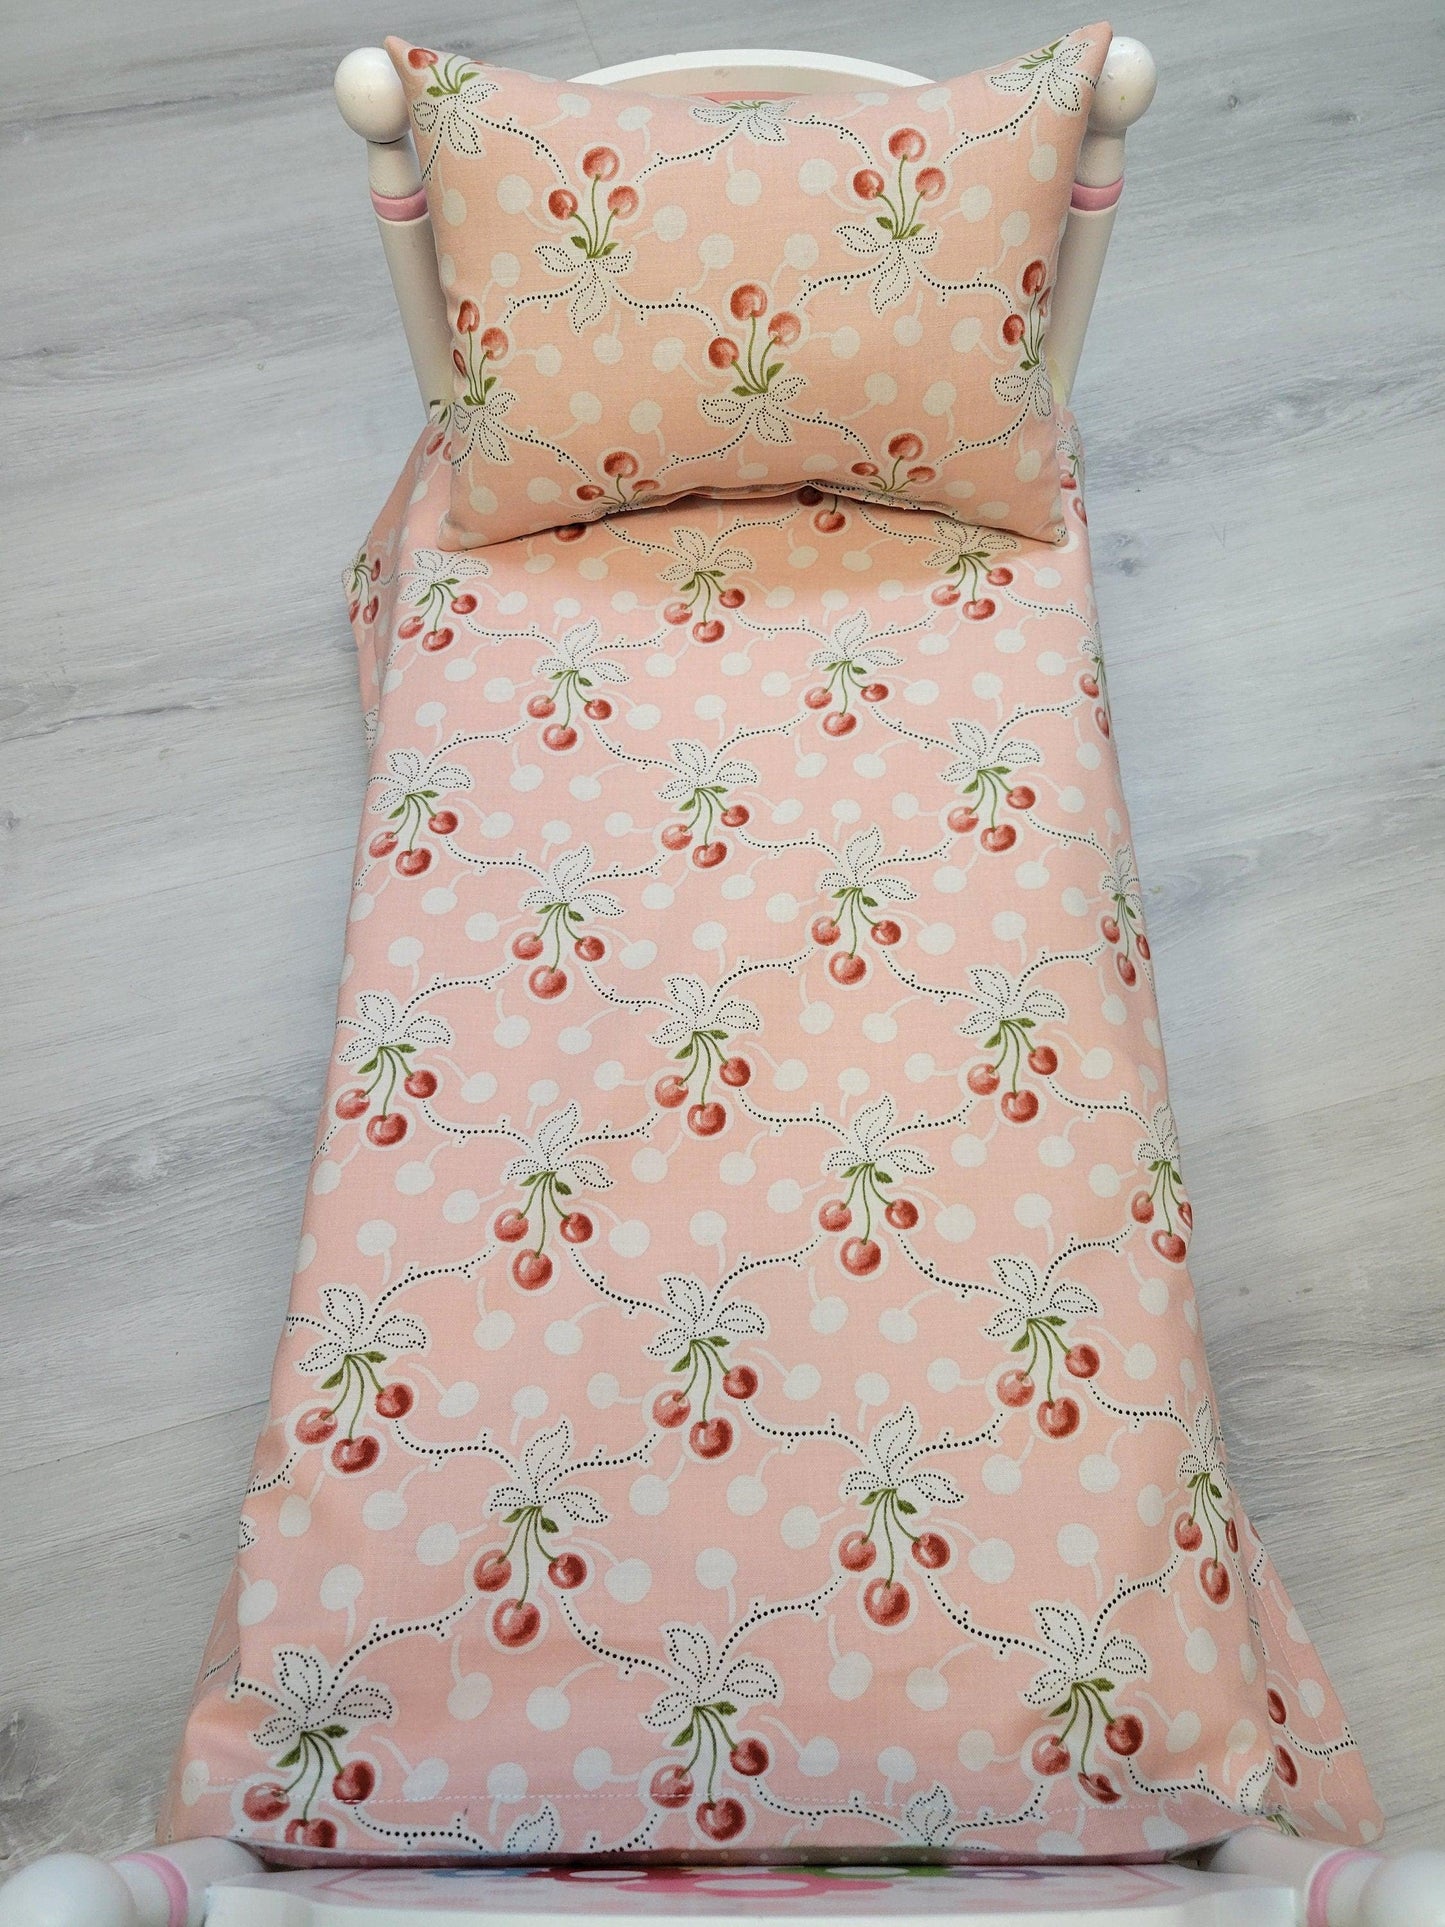 Cherries Doll Bedding, Fruit Bedding for the 18 in dolls such as the American Girl dolls, 18 in Doll Bedding Set, Pet bed set